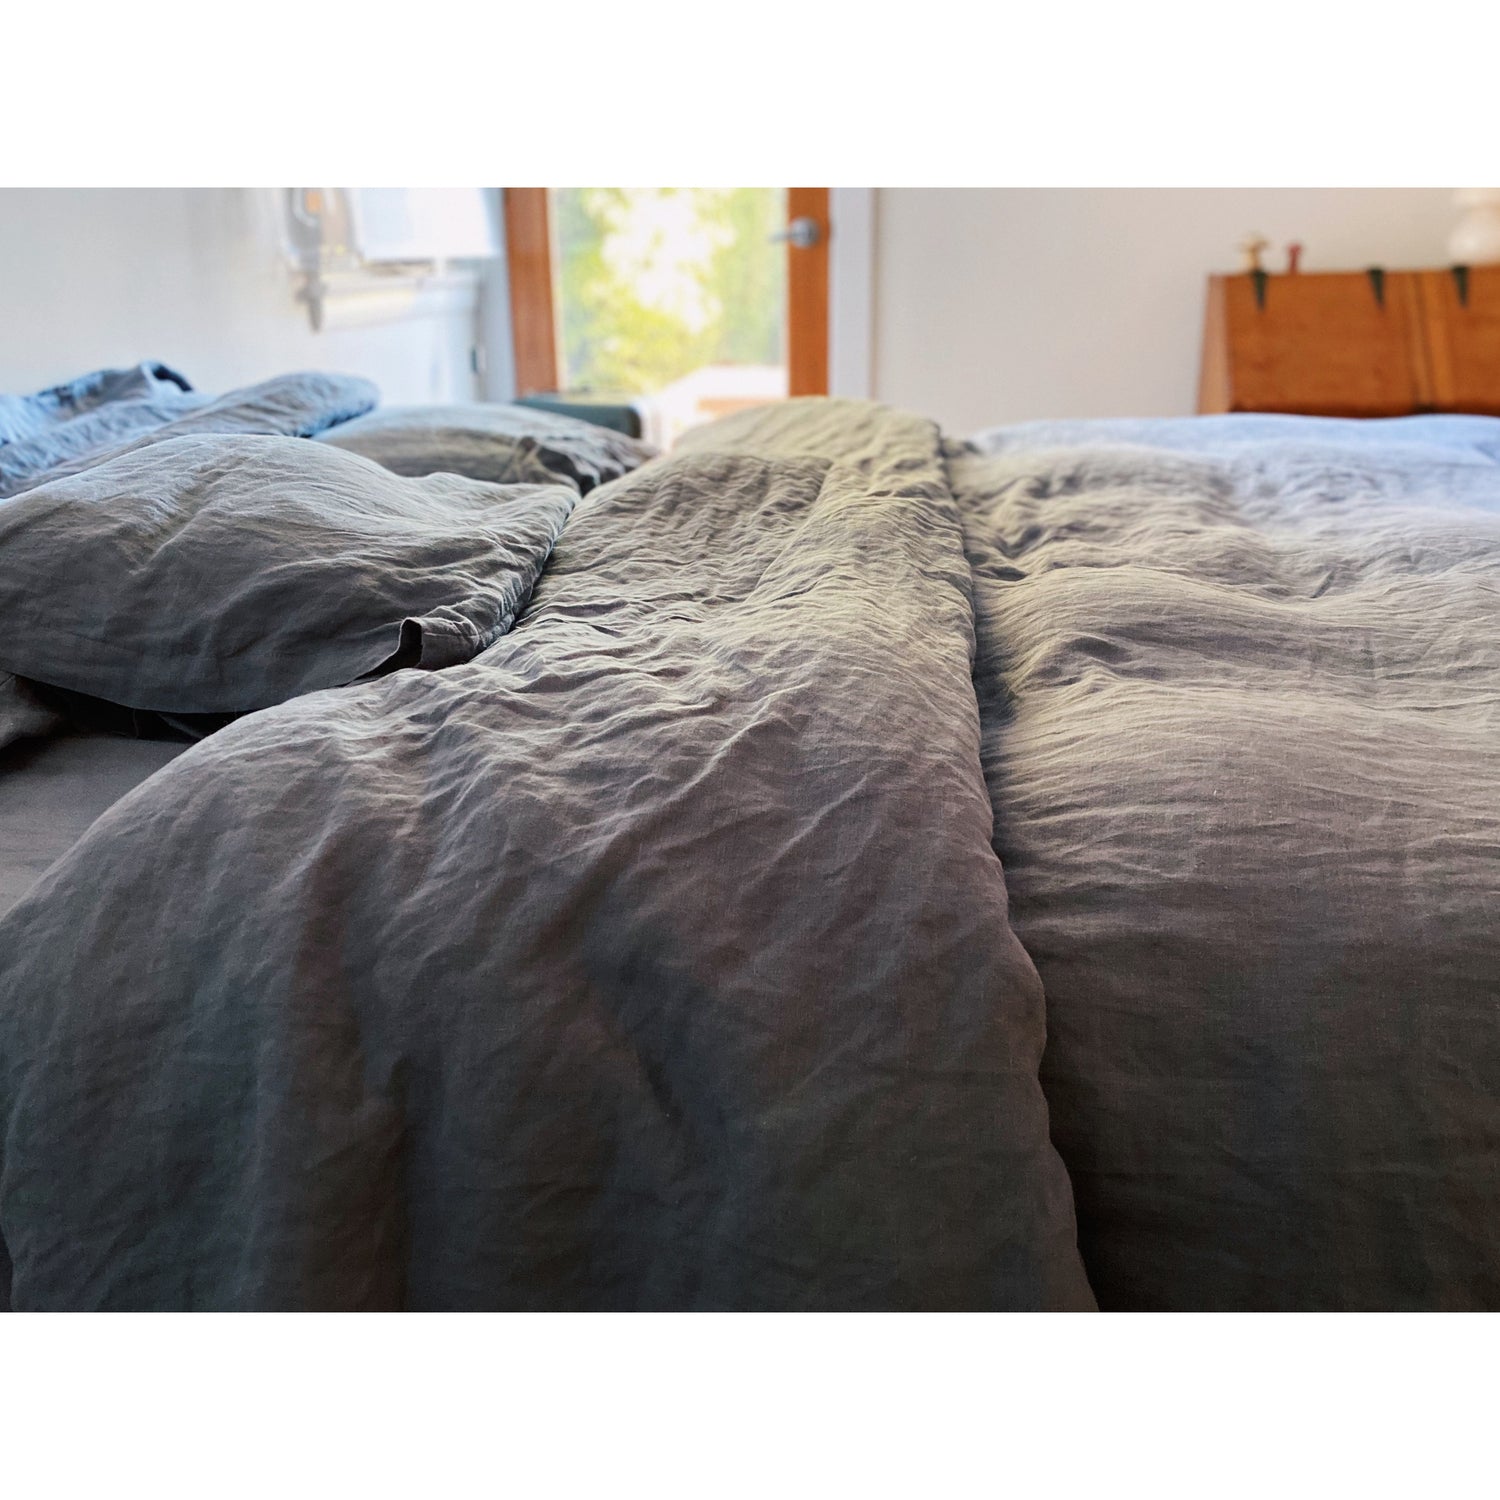 bed with hemp bedding in a muted navy color